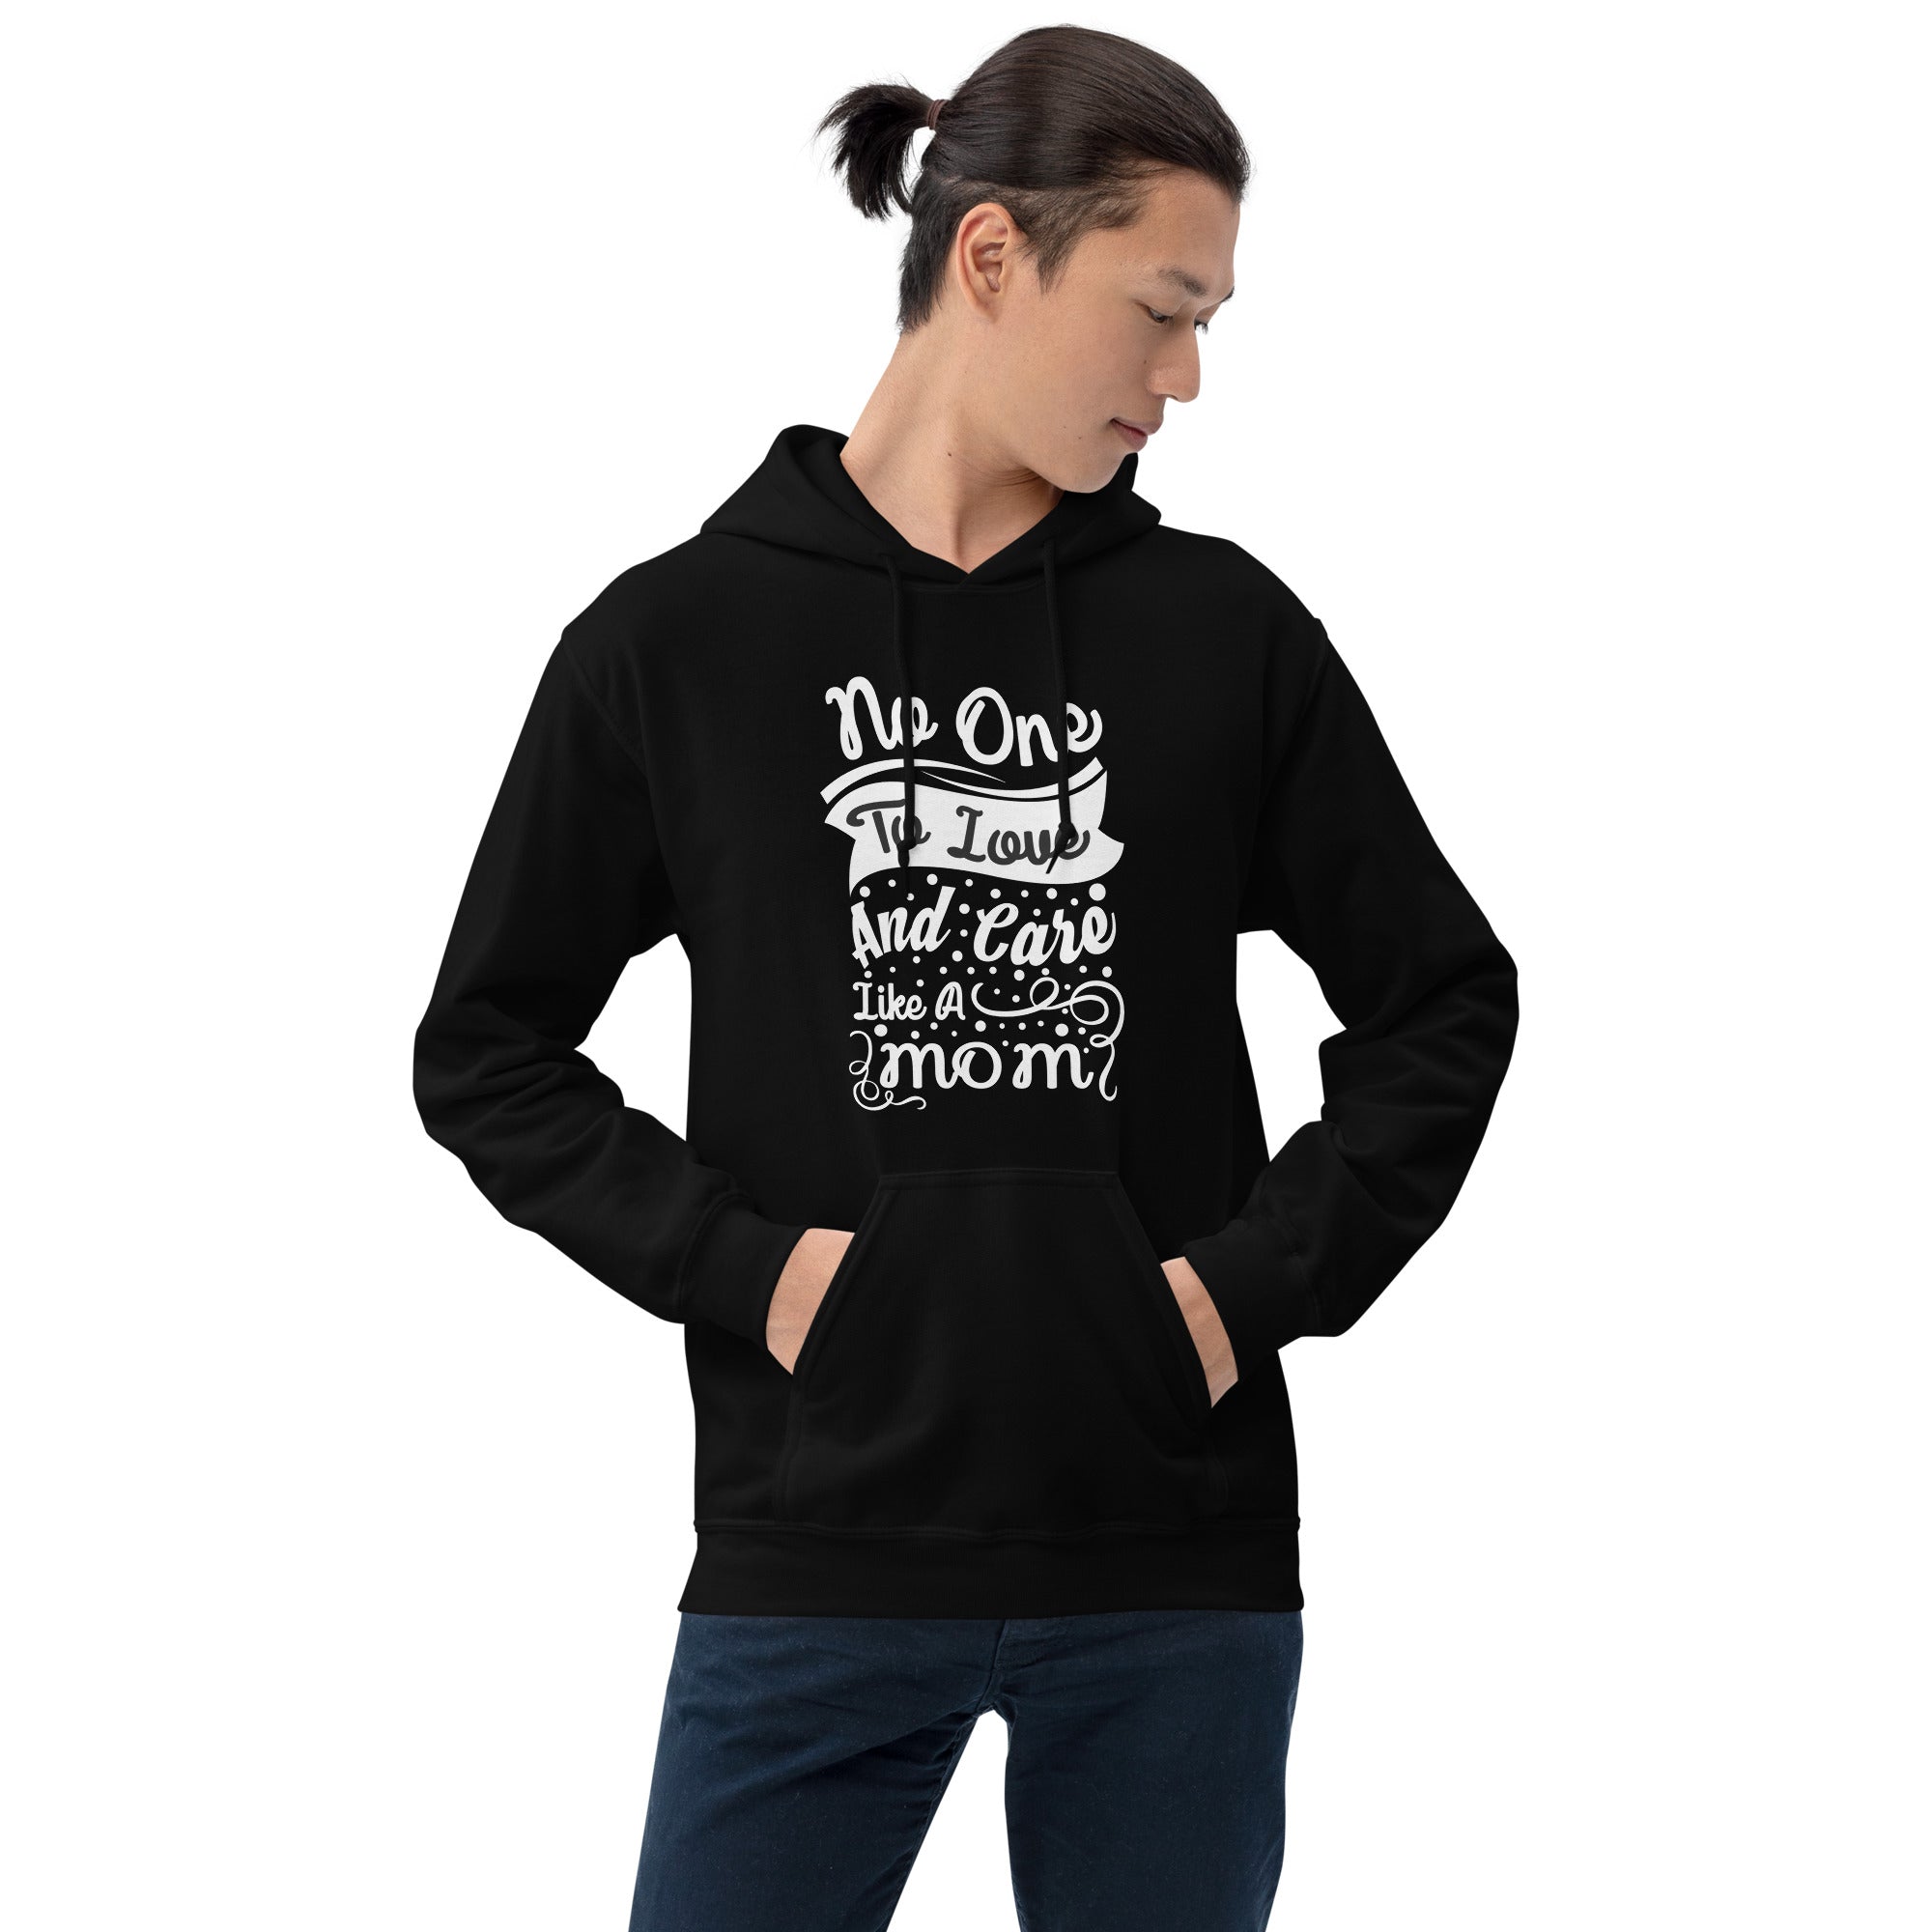 No One To Love And Care Like A Mom - Unisex Hoodie